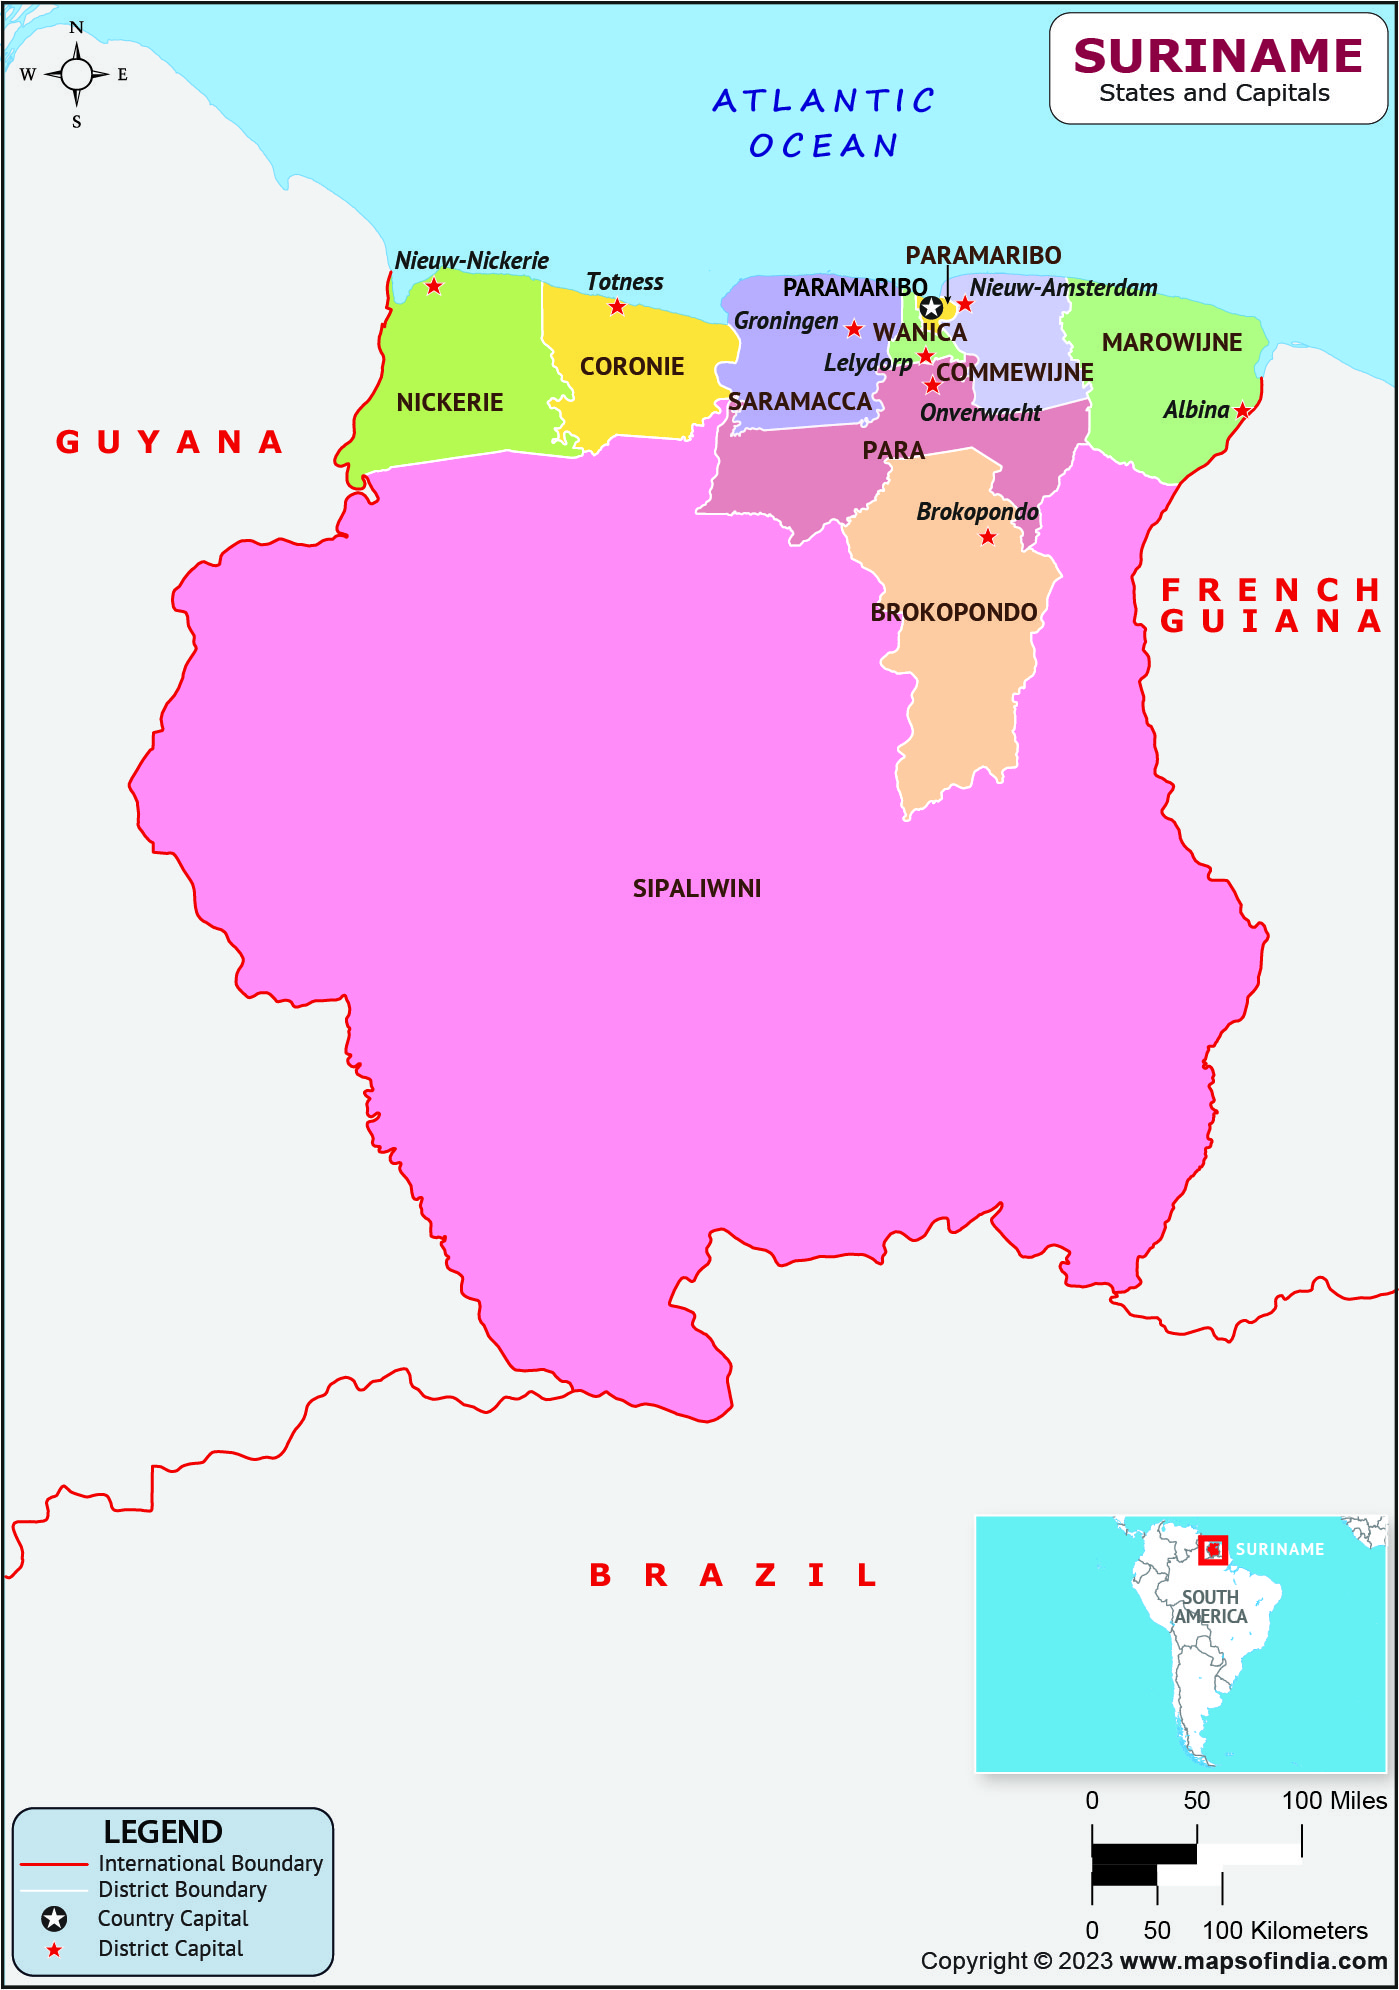 Suriname Districts and Capitals List and Map | List of Districts and ...